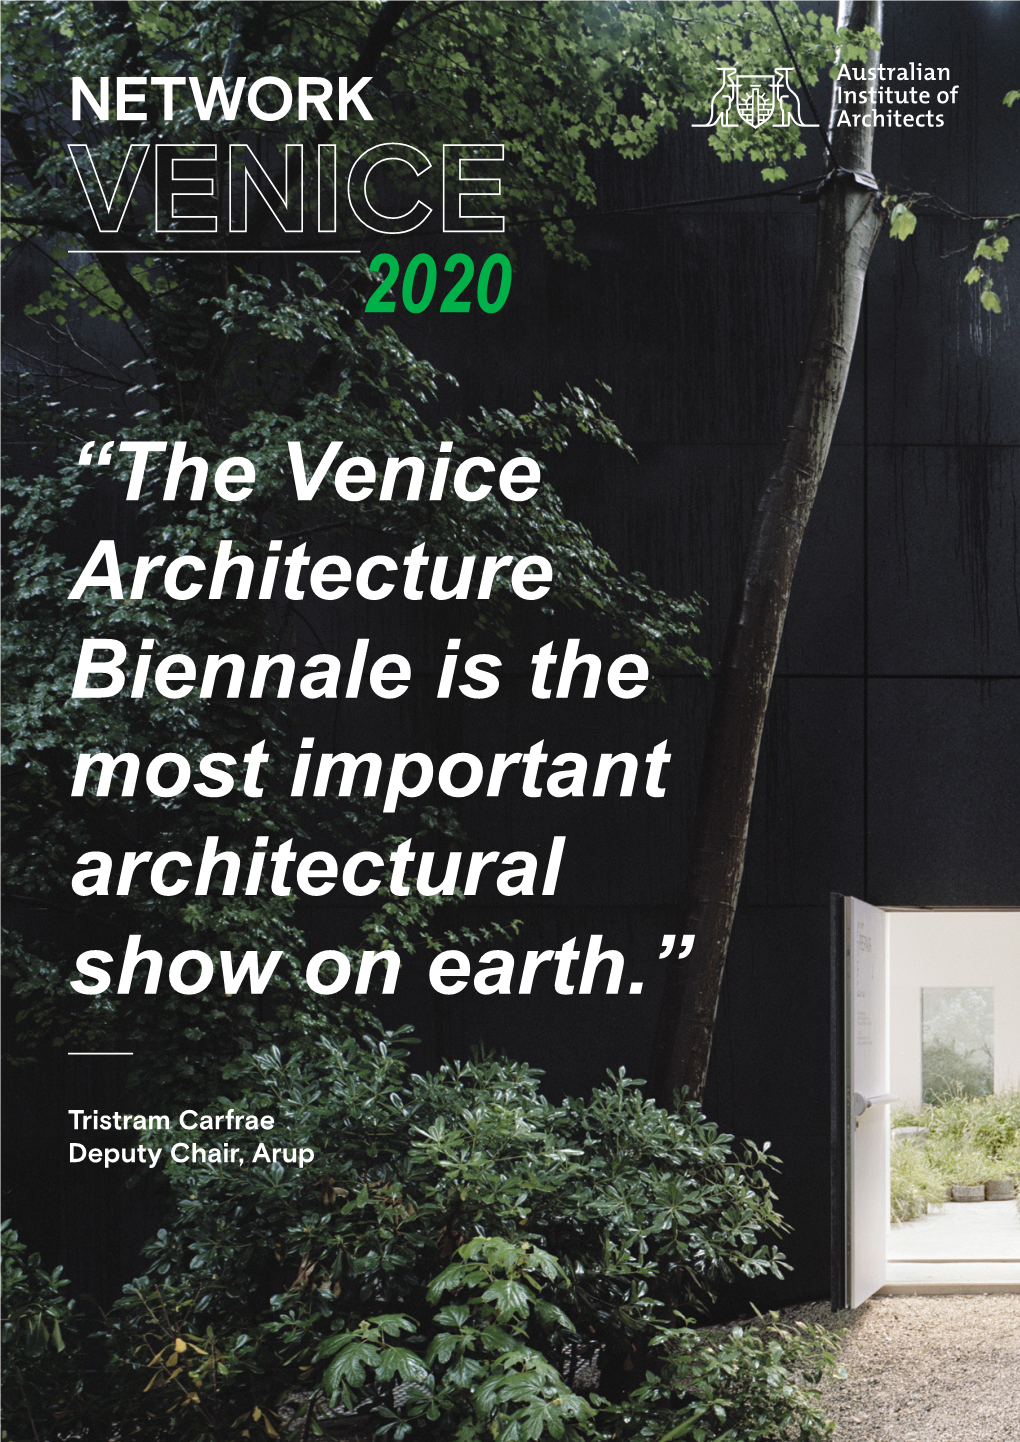 “The Venice Architecture Biennale Is the Most Important Architectural Show on Earth.”